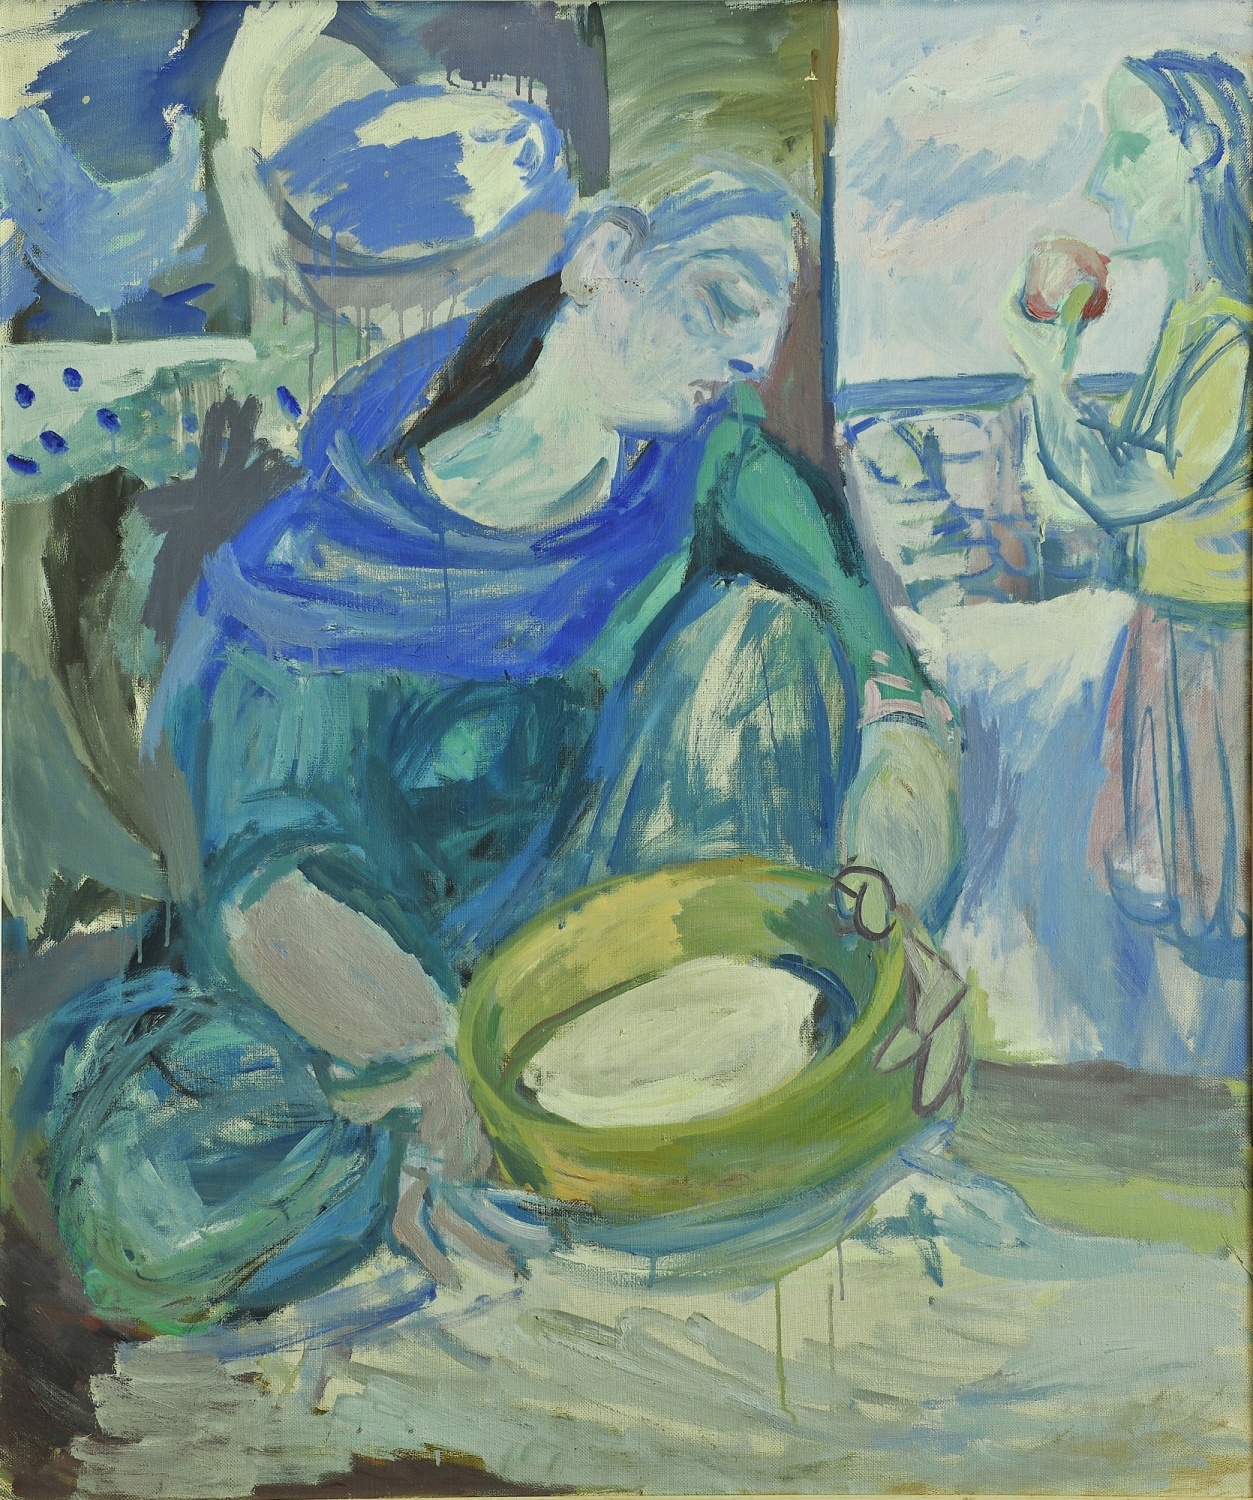 Woman with Sieve